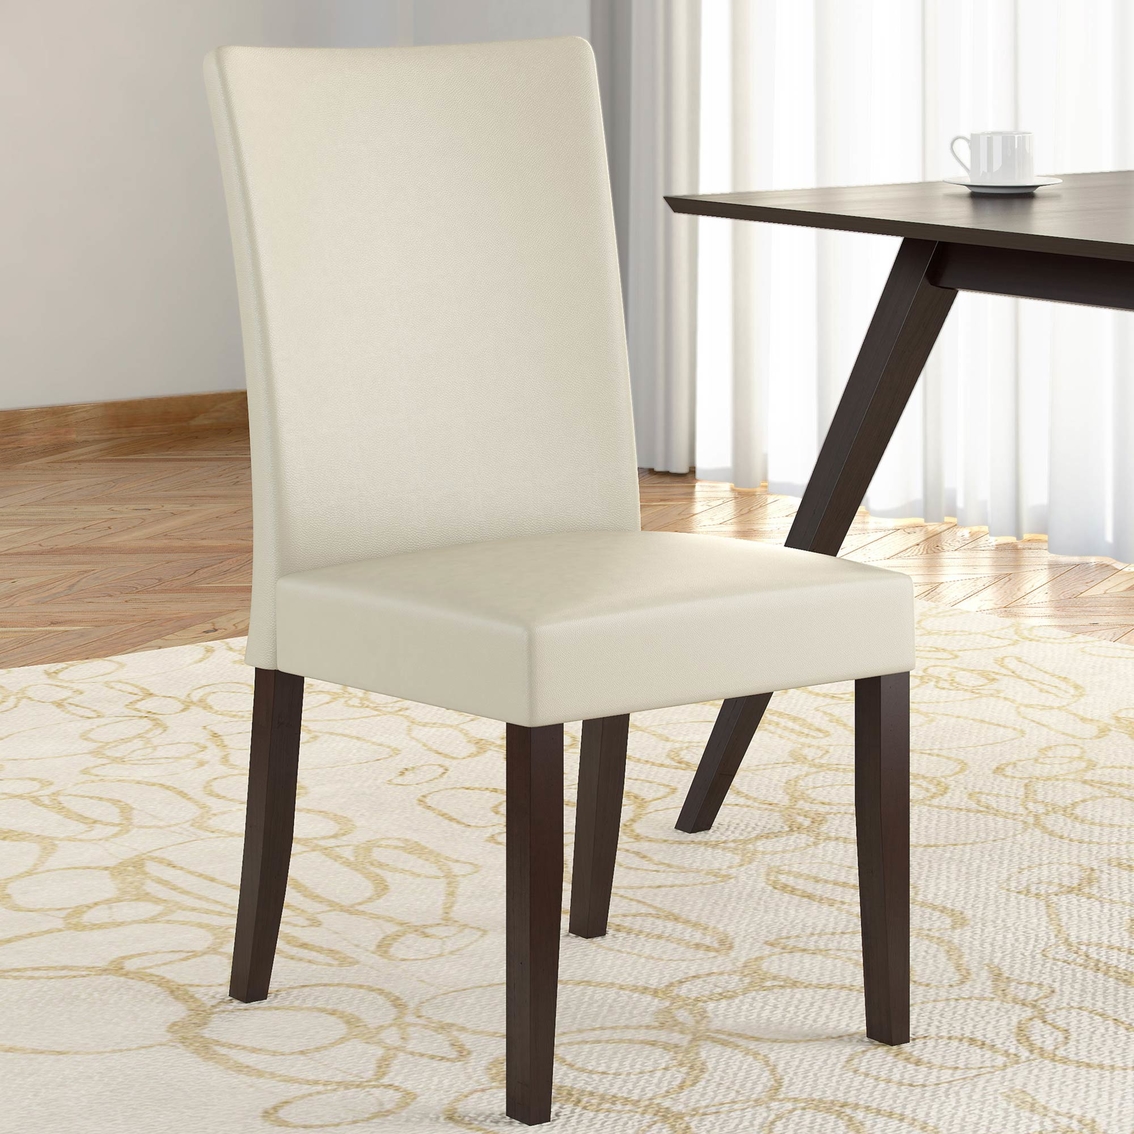 CorLiving DRC-885-C Atwood Leatherette Dining Chairs, Set of 2 - Image 4 of 4